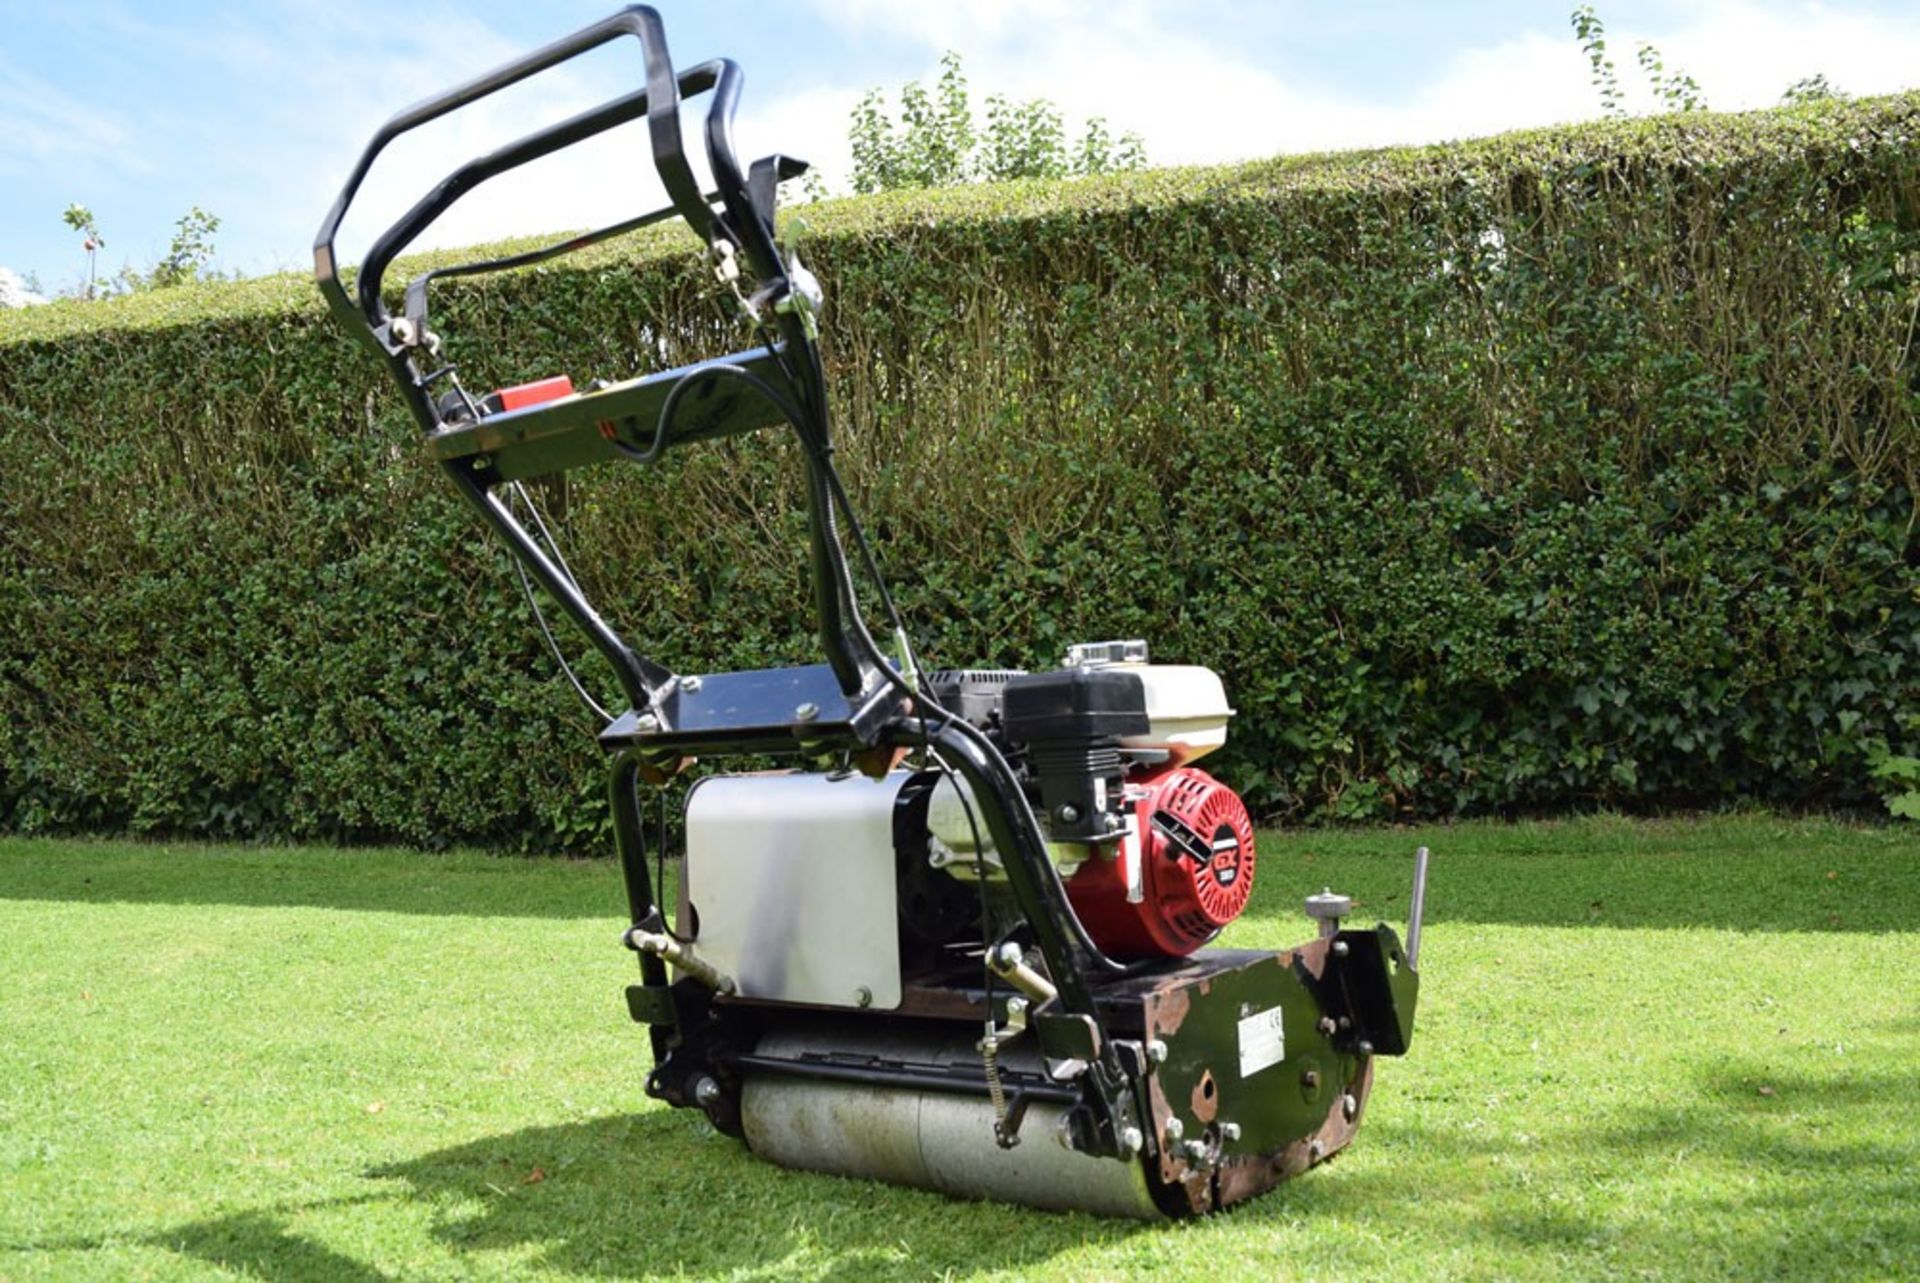 2012 Allett Shaver 20, 10 Blade Cylinder Mower With Grass Box - Image 5 of 8